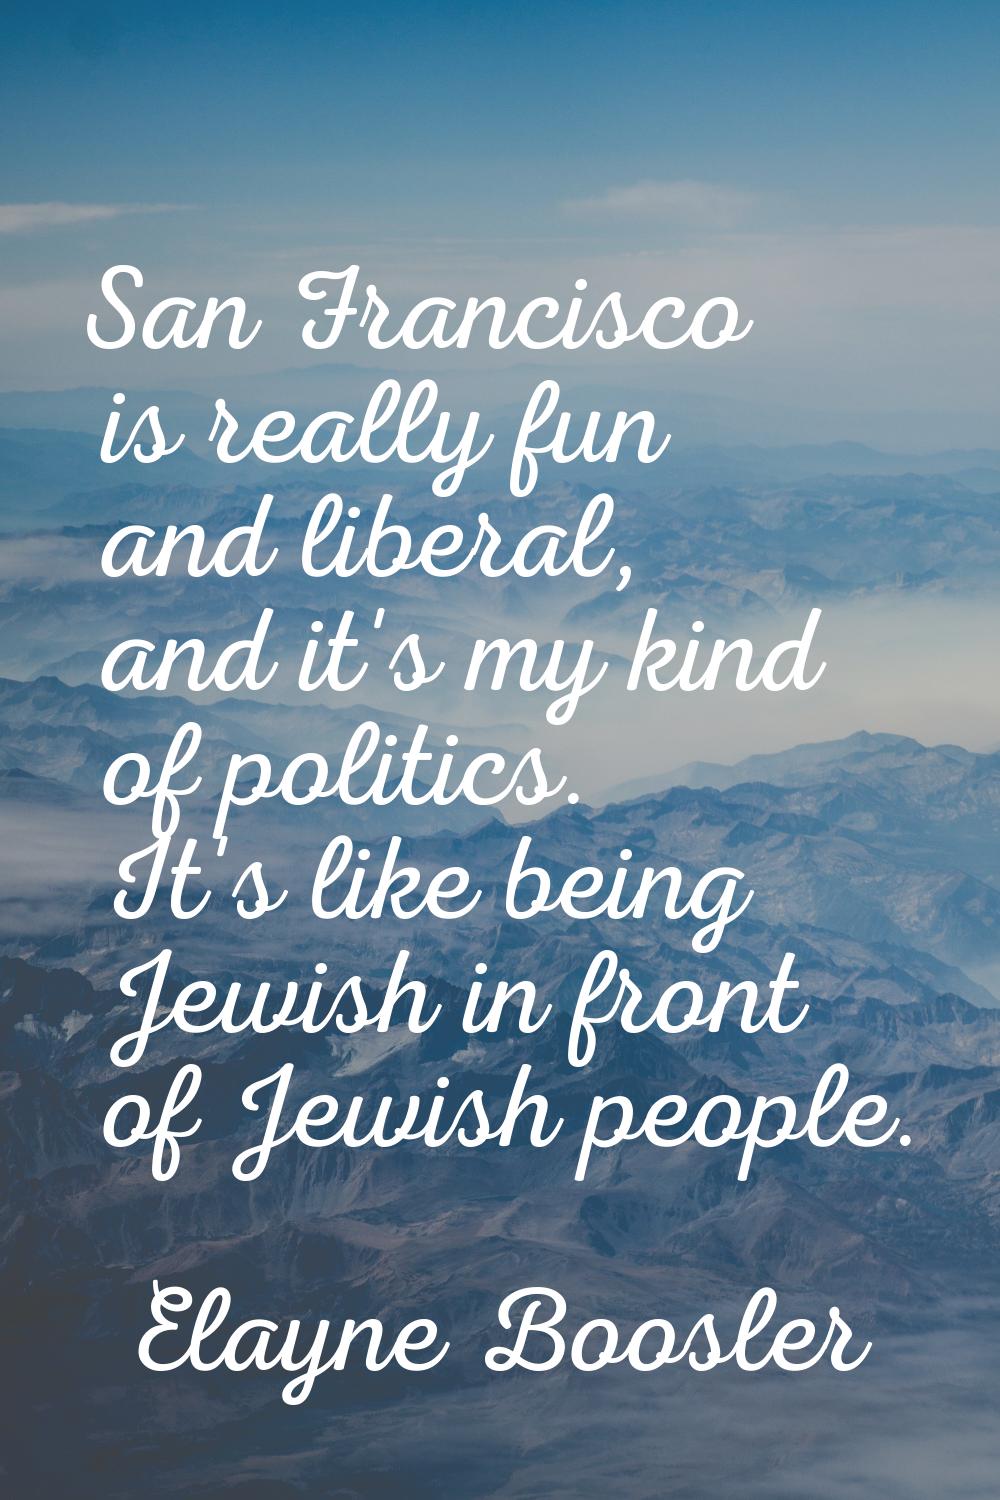 San Francisco is really fun and liberal, and it's my kind of politics. It's like being Jewish in fr